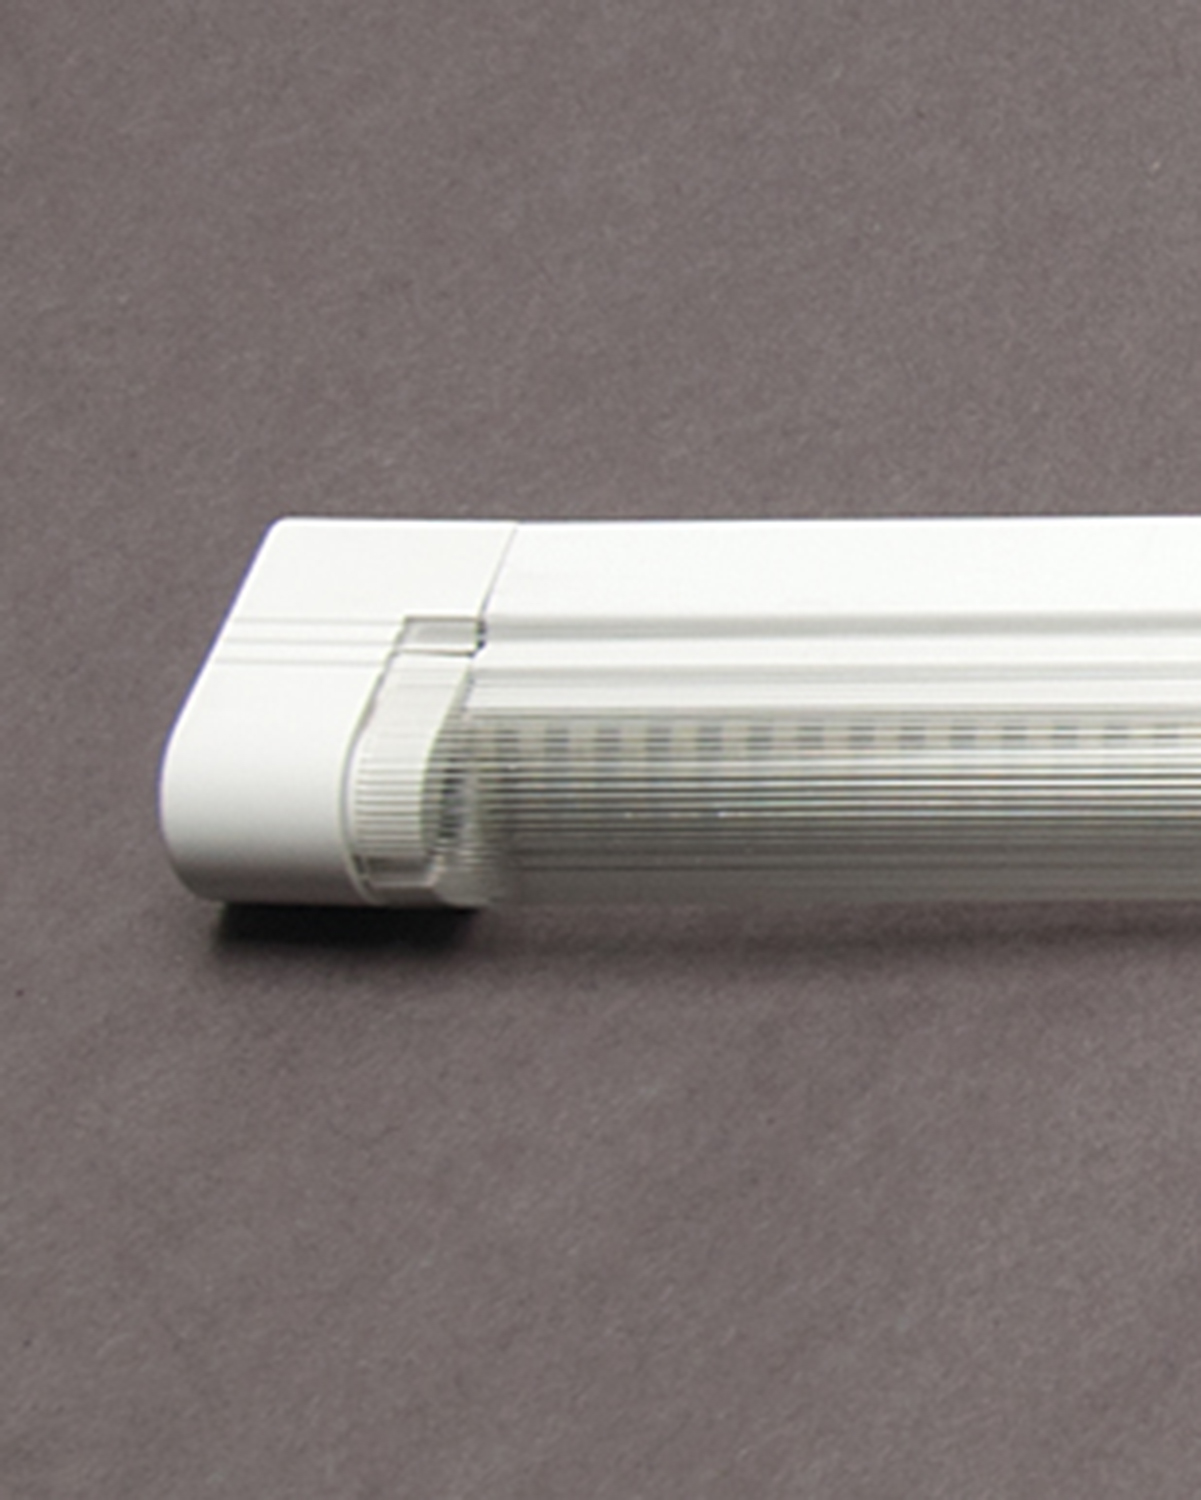 Outwater’s Economy T5 LED Lighting